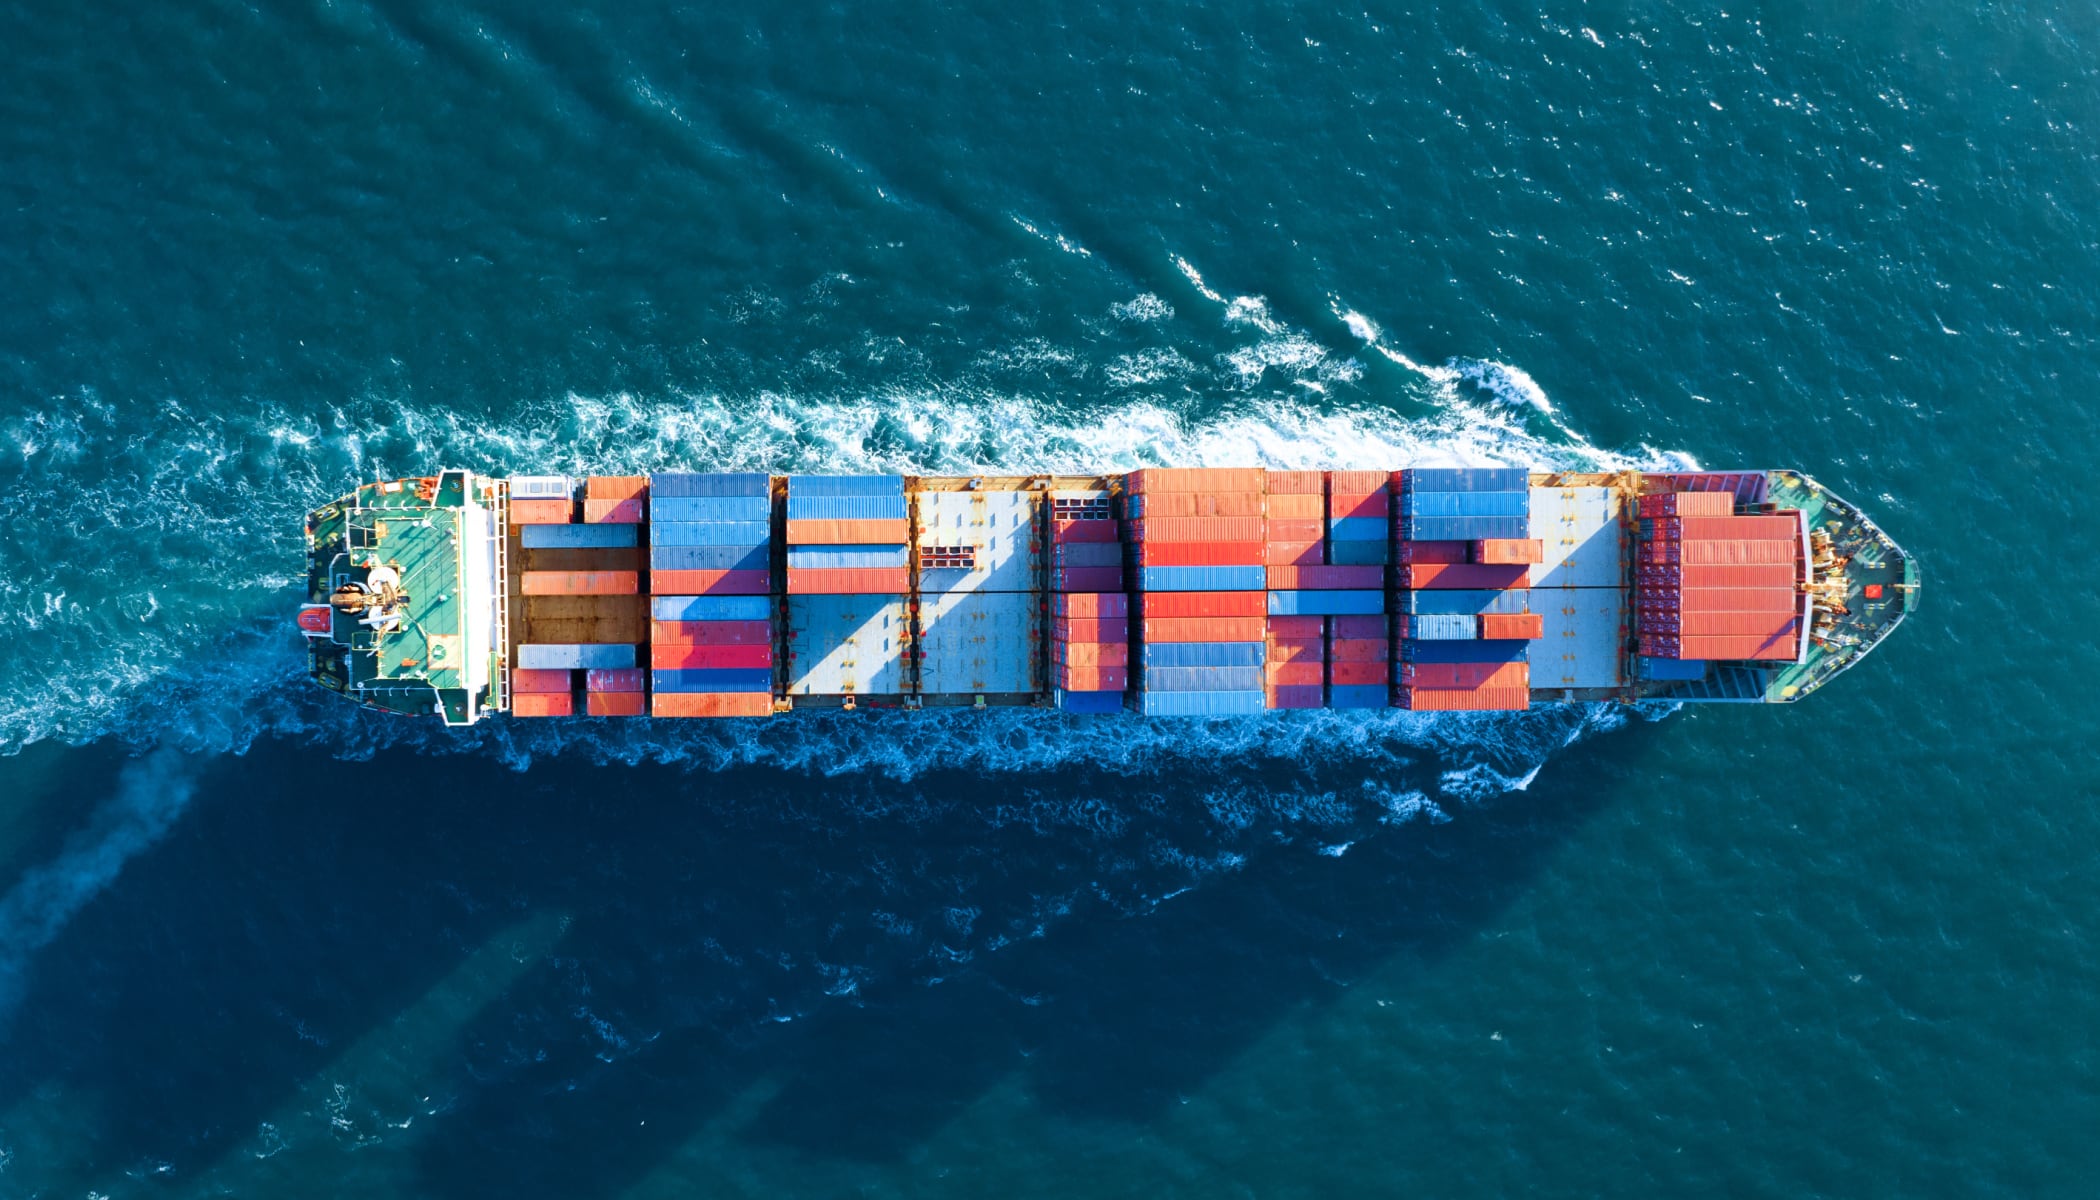 Aerial view of a cargo ship loaded with rows of colorful cargo containers sailing through rippling green waters